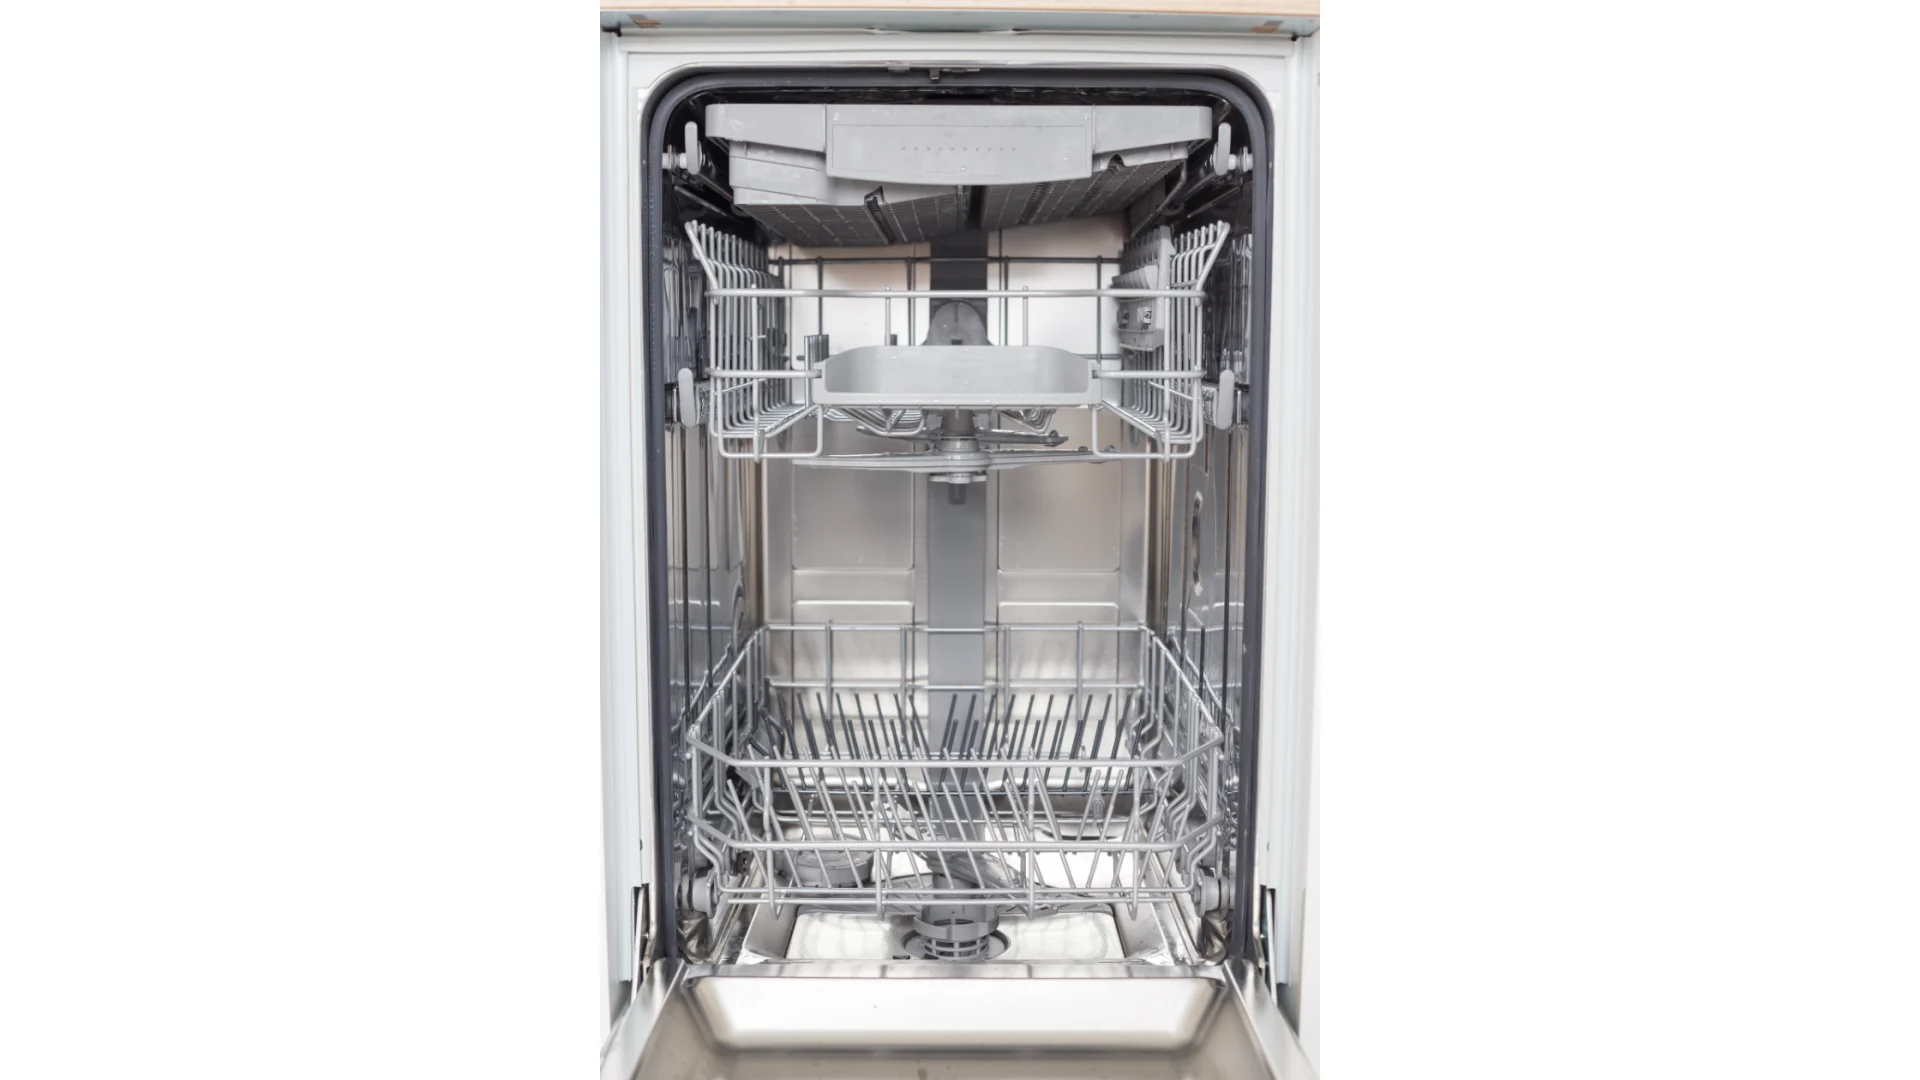 Can-I-Use-Apple-Cider-Vinegar-to-Clean-My-Dishwasher-